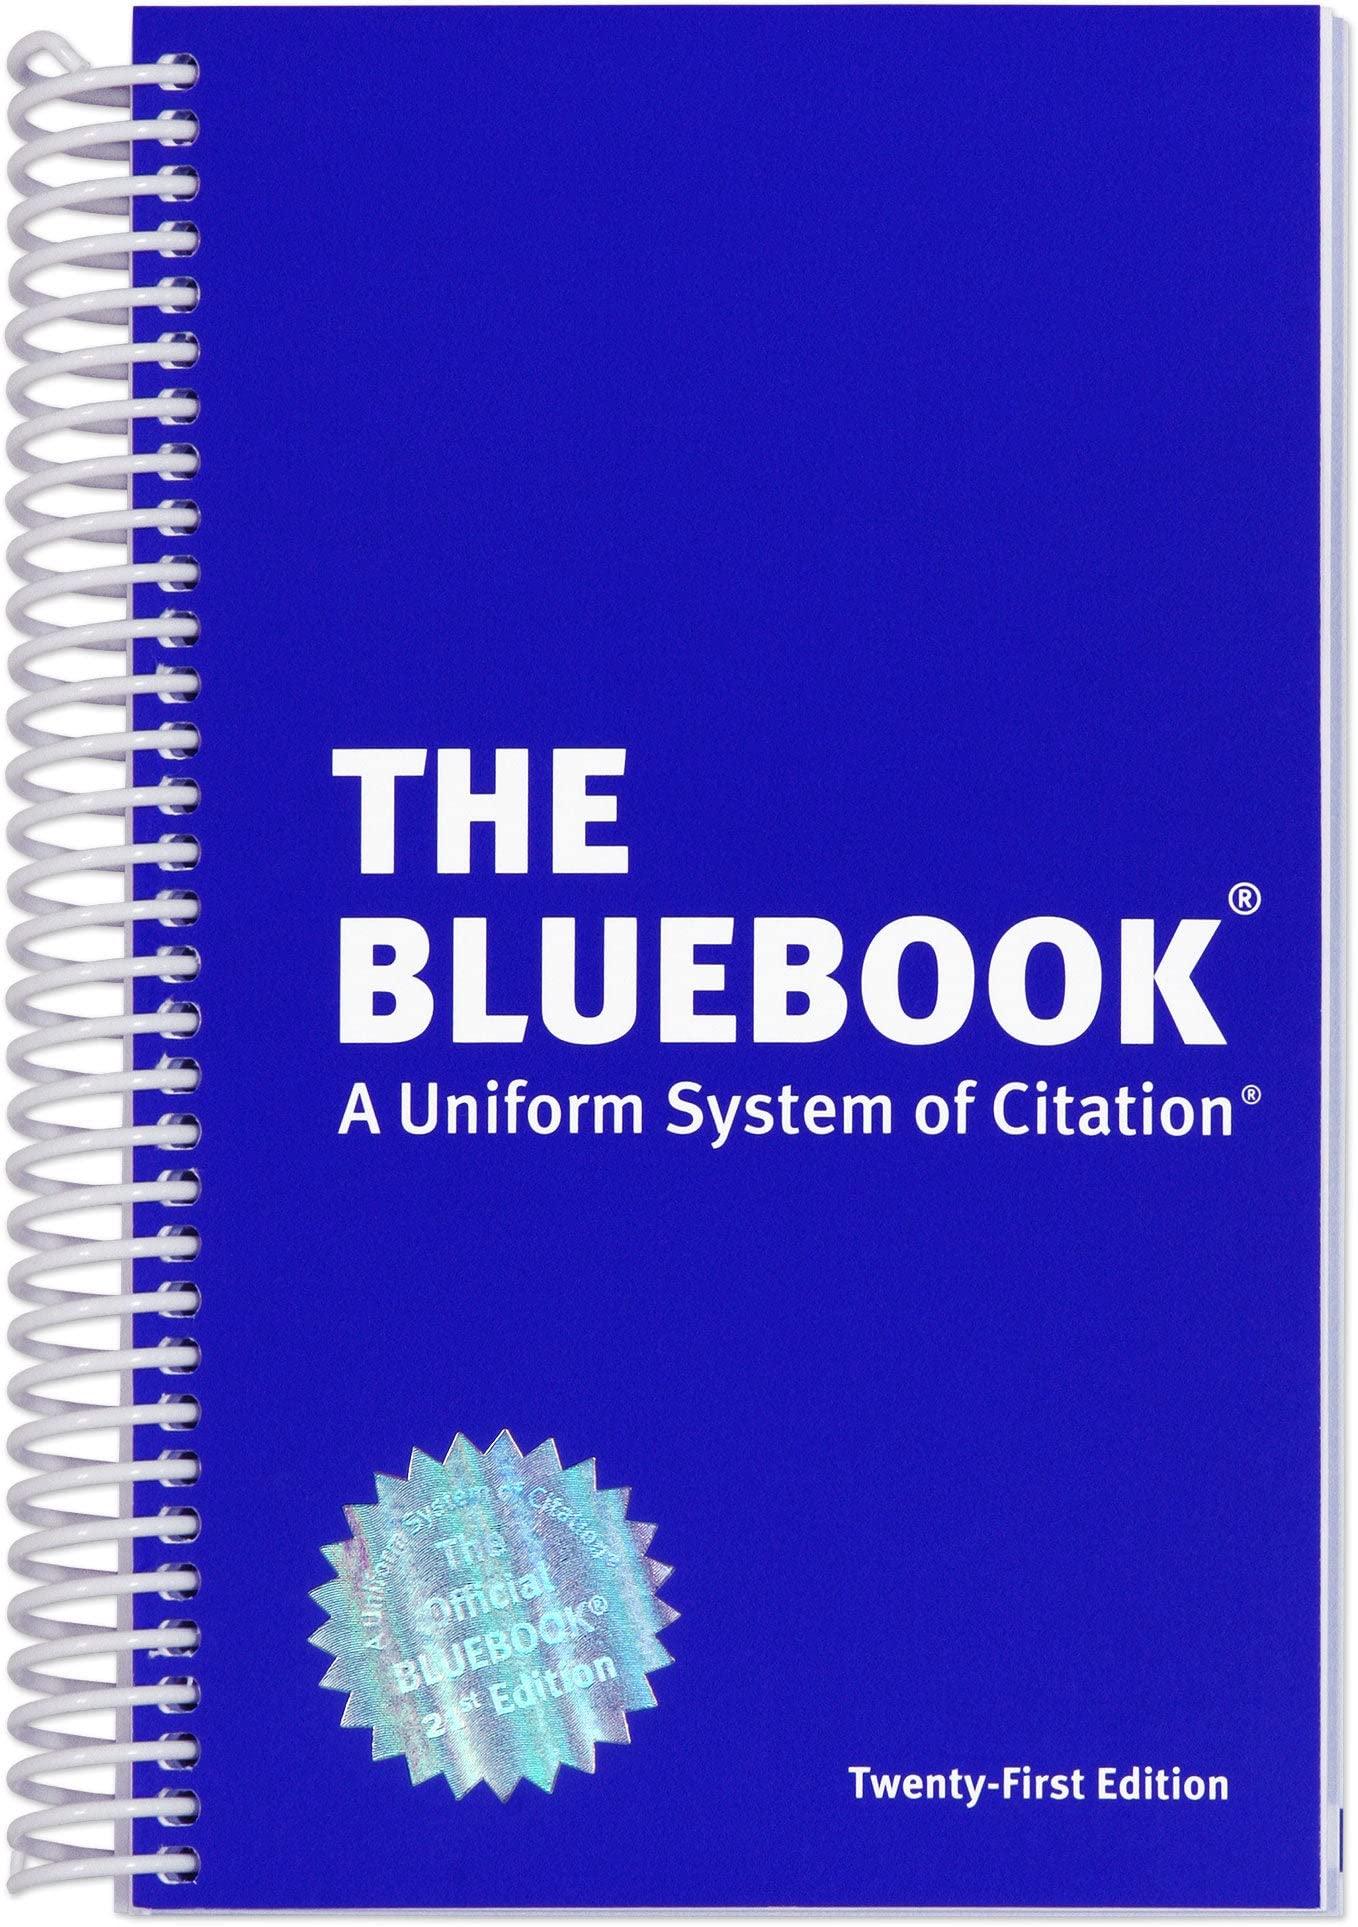 the bluebook a uniform system of citation 21st edition columbia law review, harvard law review, university of